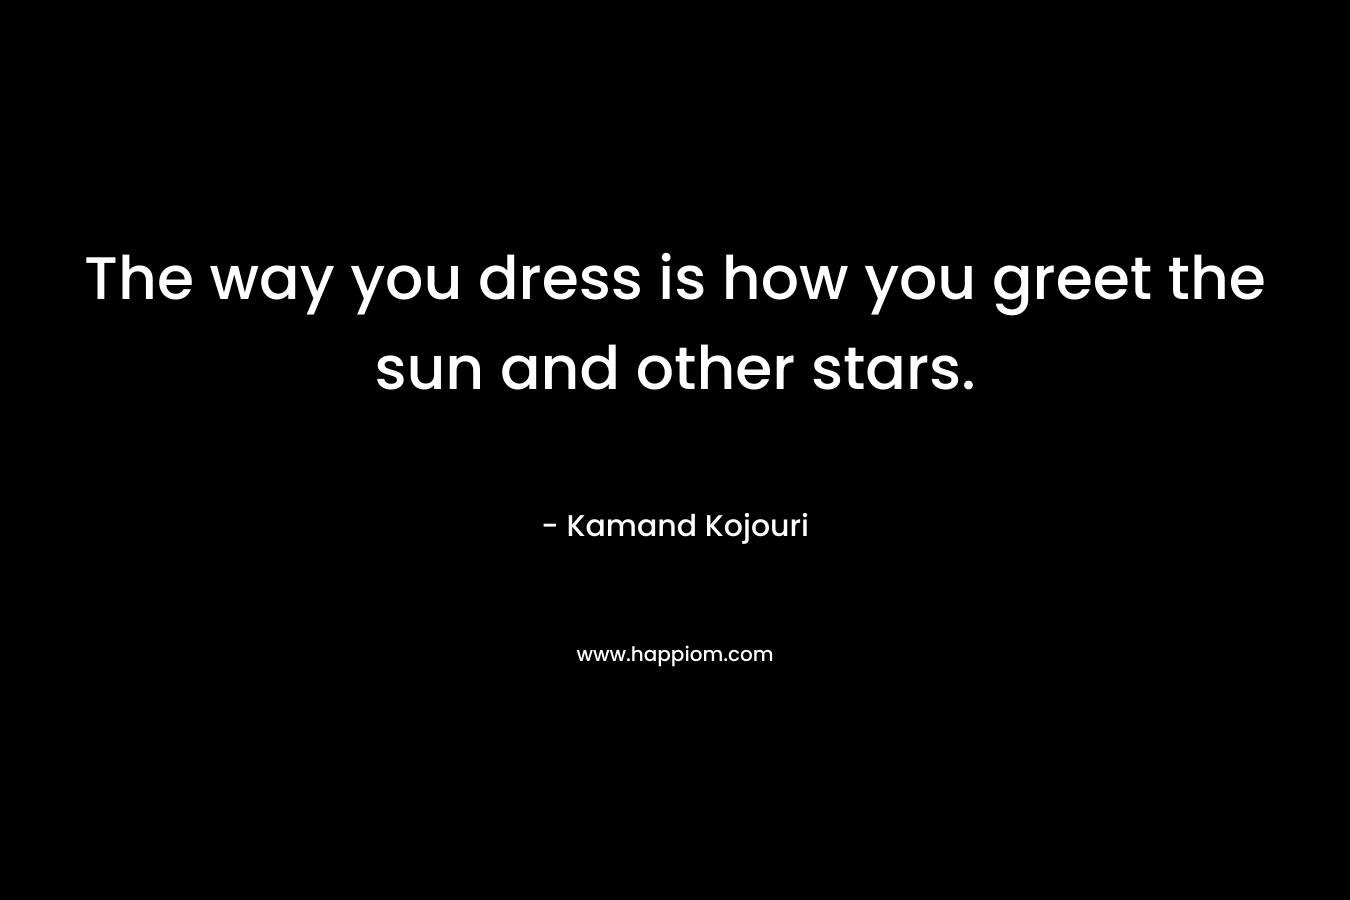 The way you dress is how you greet the sun and other stars. – Kamand Kojouri